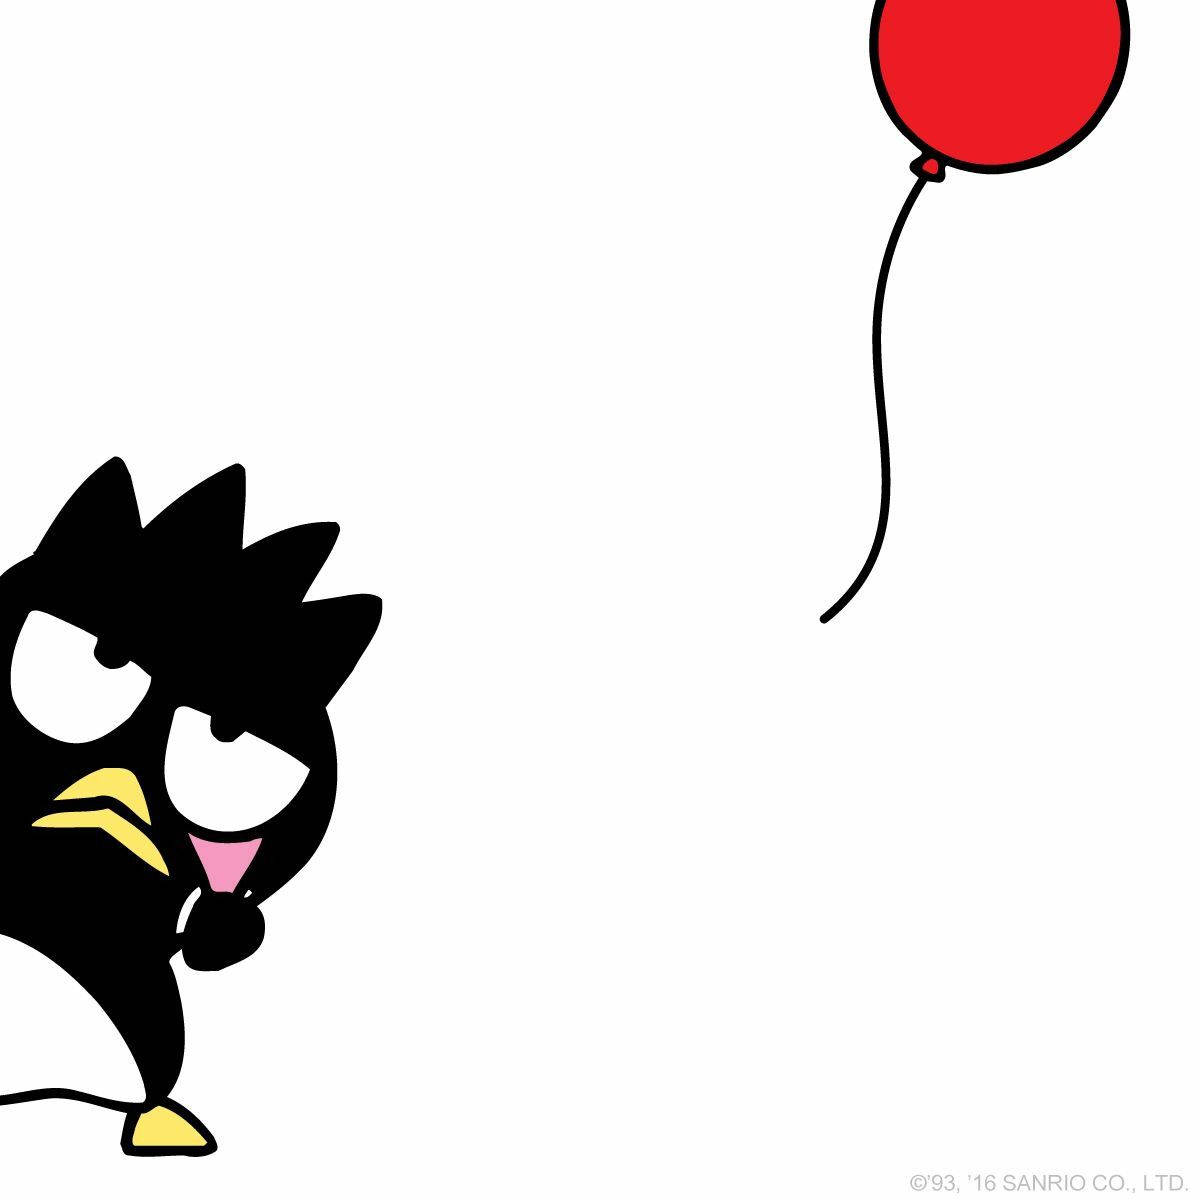 Sanrio's Badtz Maru With Red Balloon